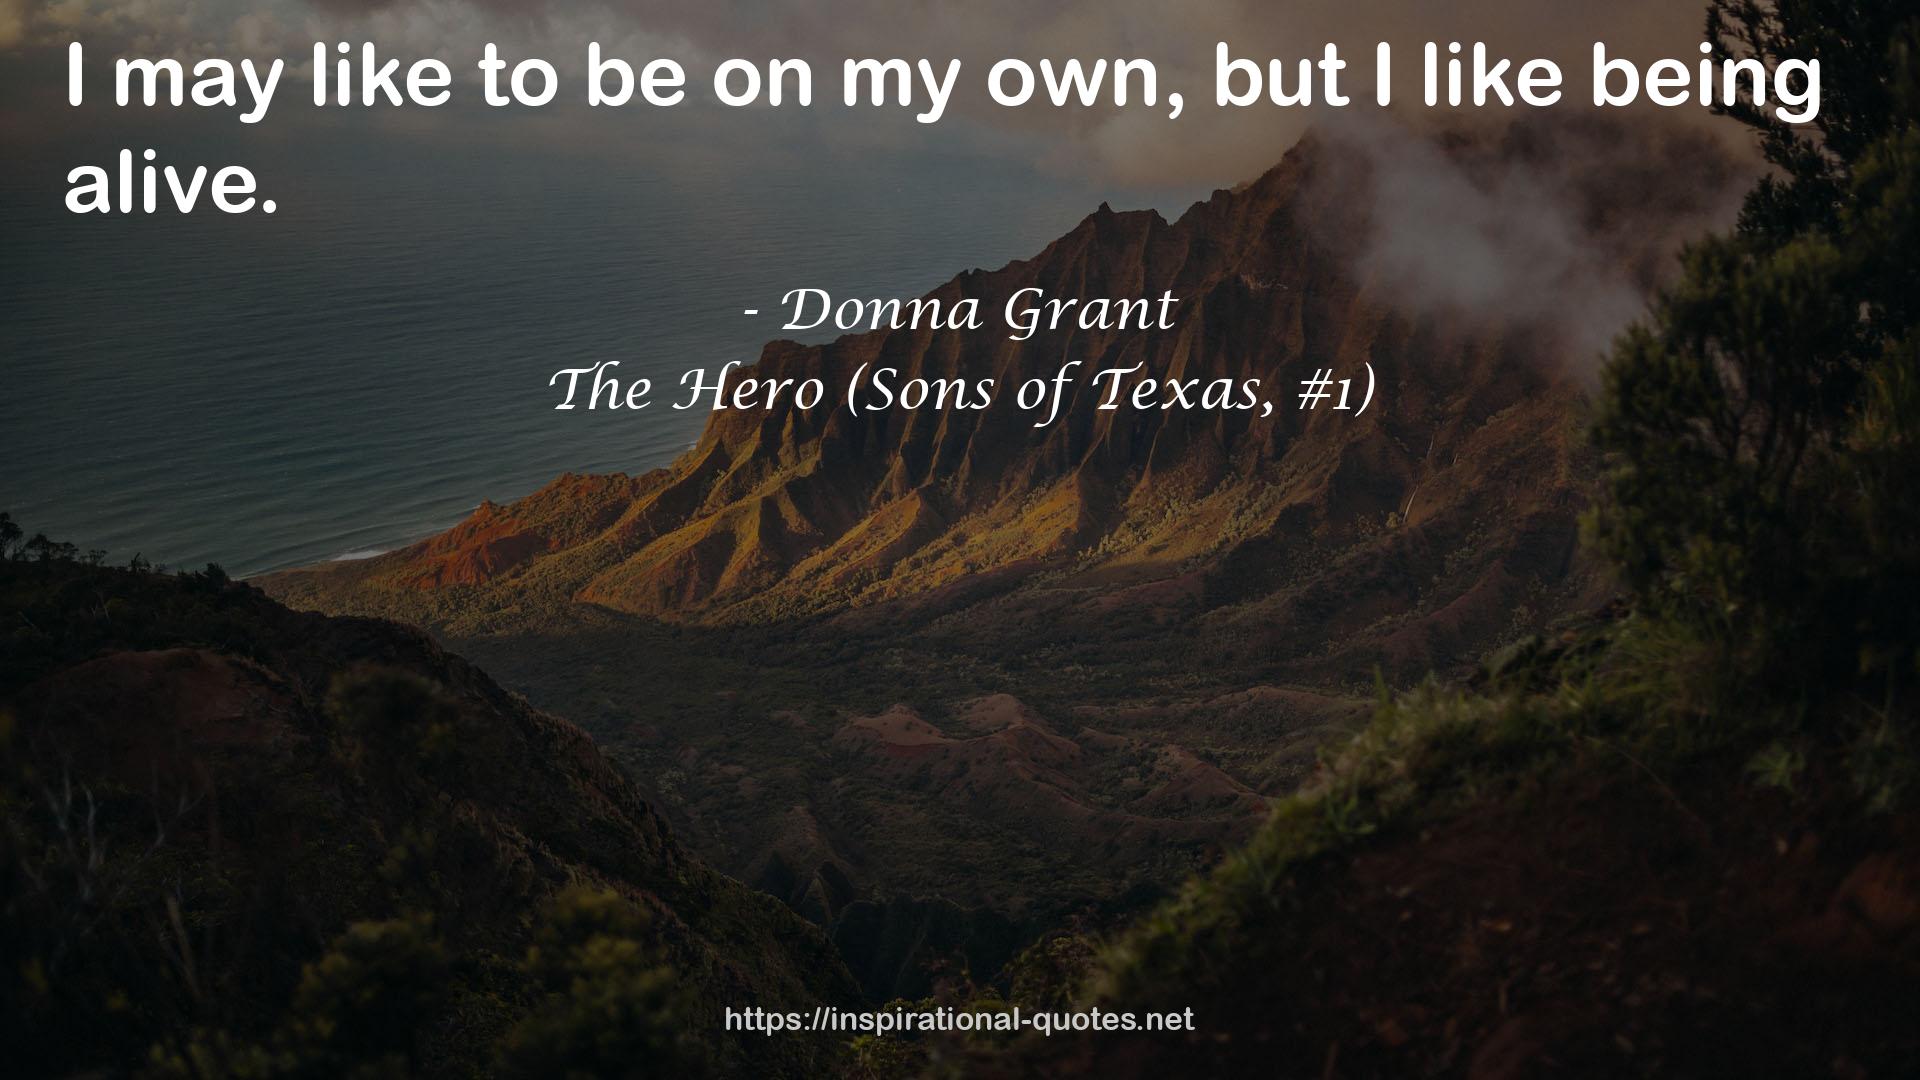 The Hero (Sons of Texas, #1) QUOTES